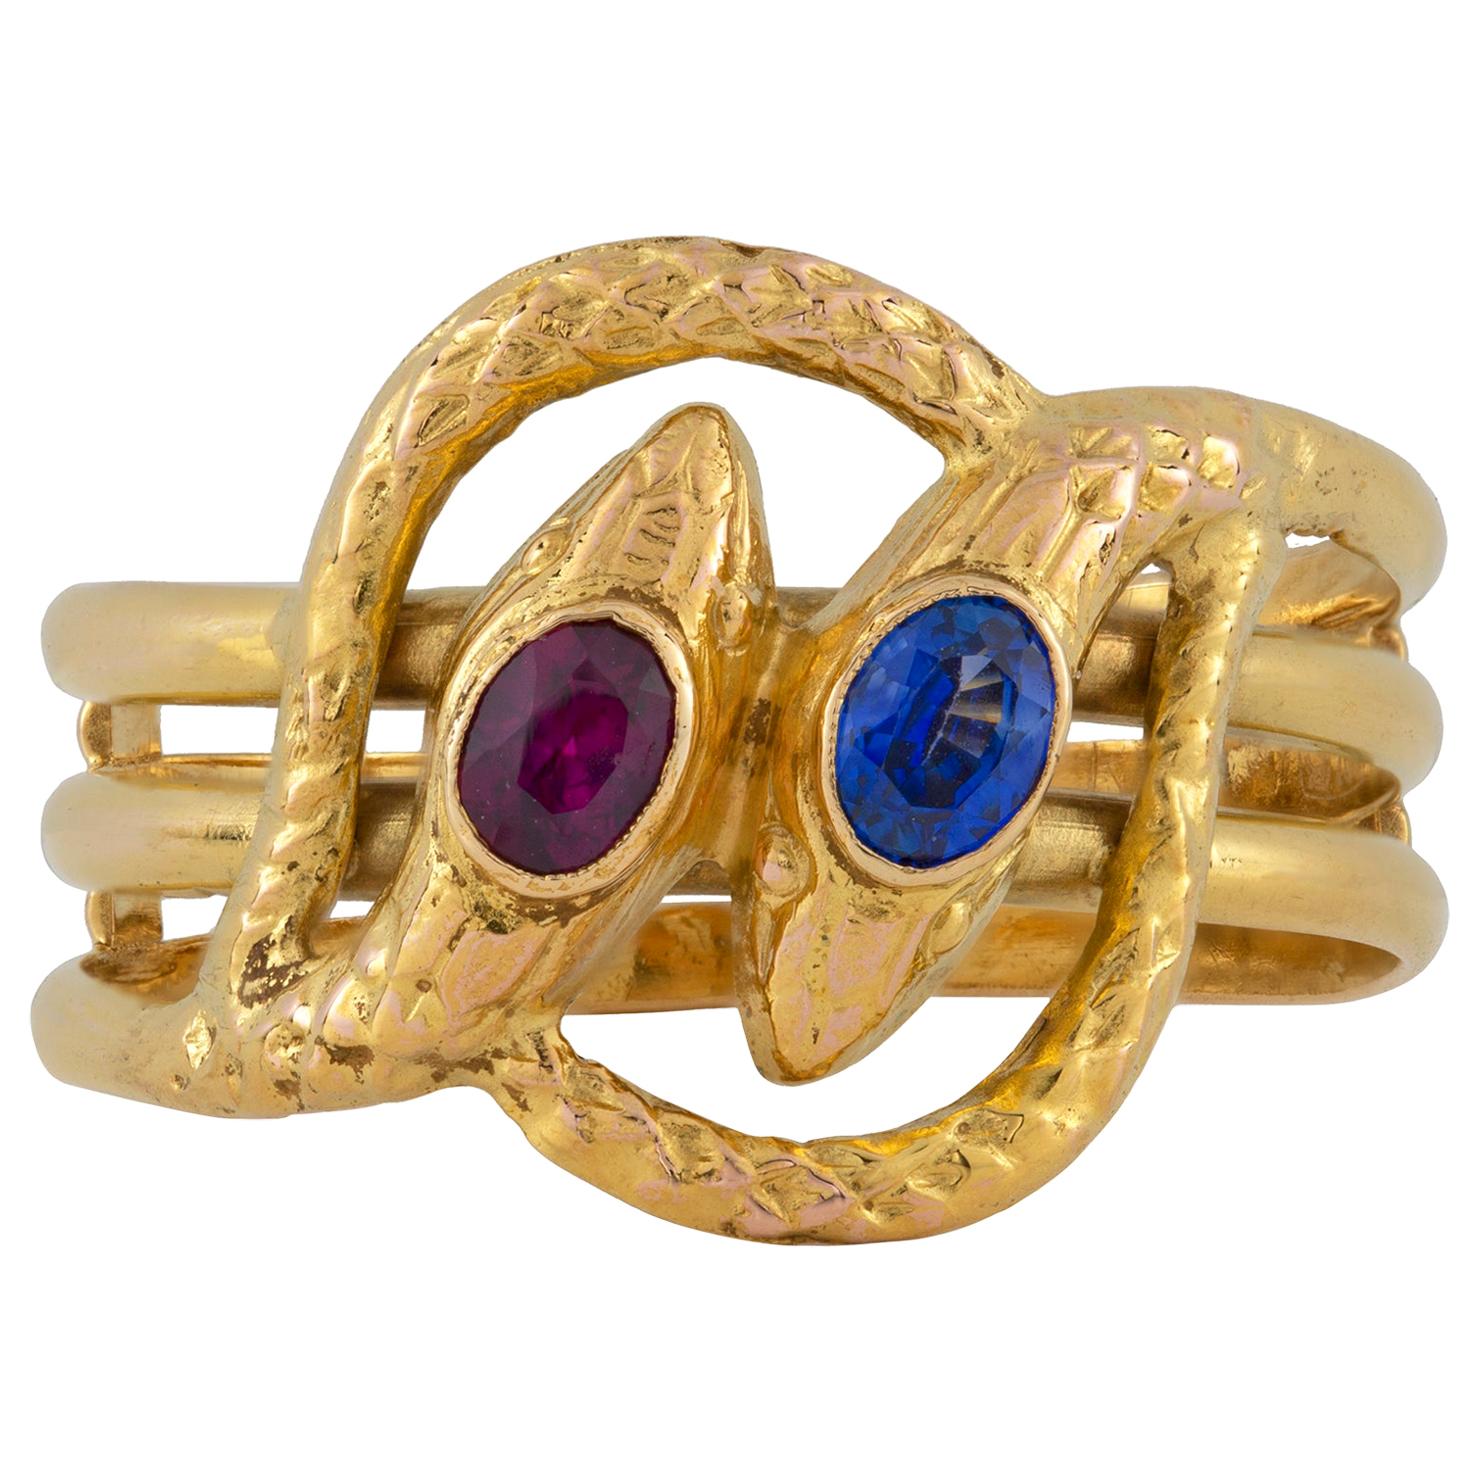 Russian Gold and Gemset Twin Serpent Ring